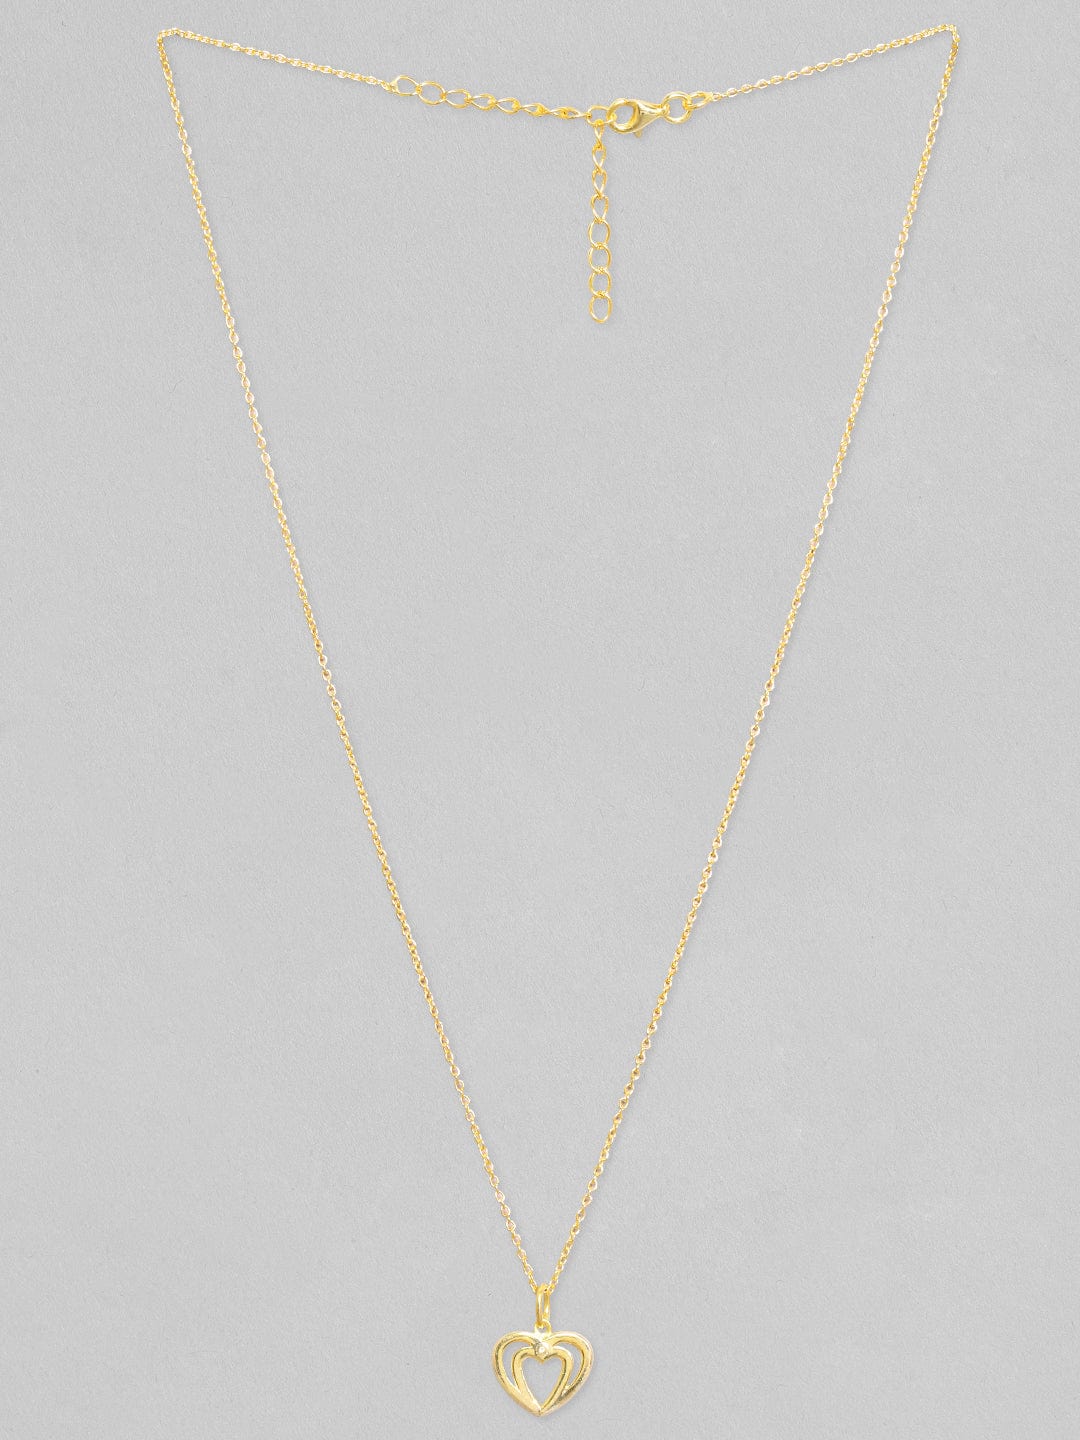 Rubans 925 Silver, 18 K Gold Plated Chain With Layered Heart Pendant Necklace. Chain &amp; Necklaces